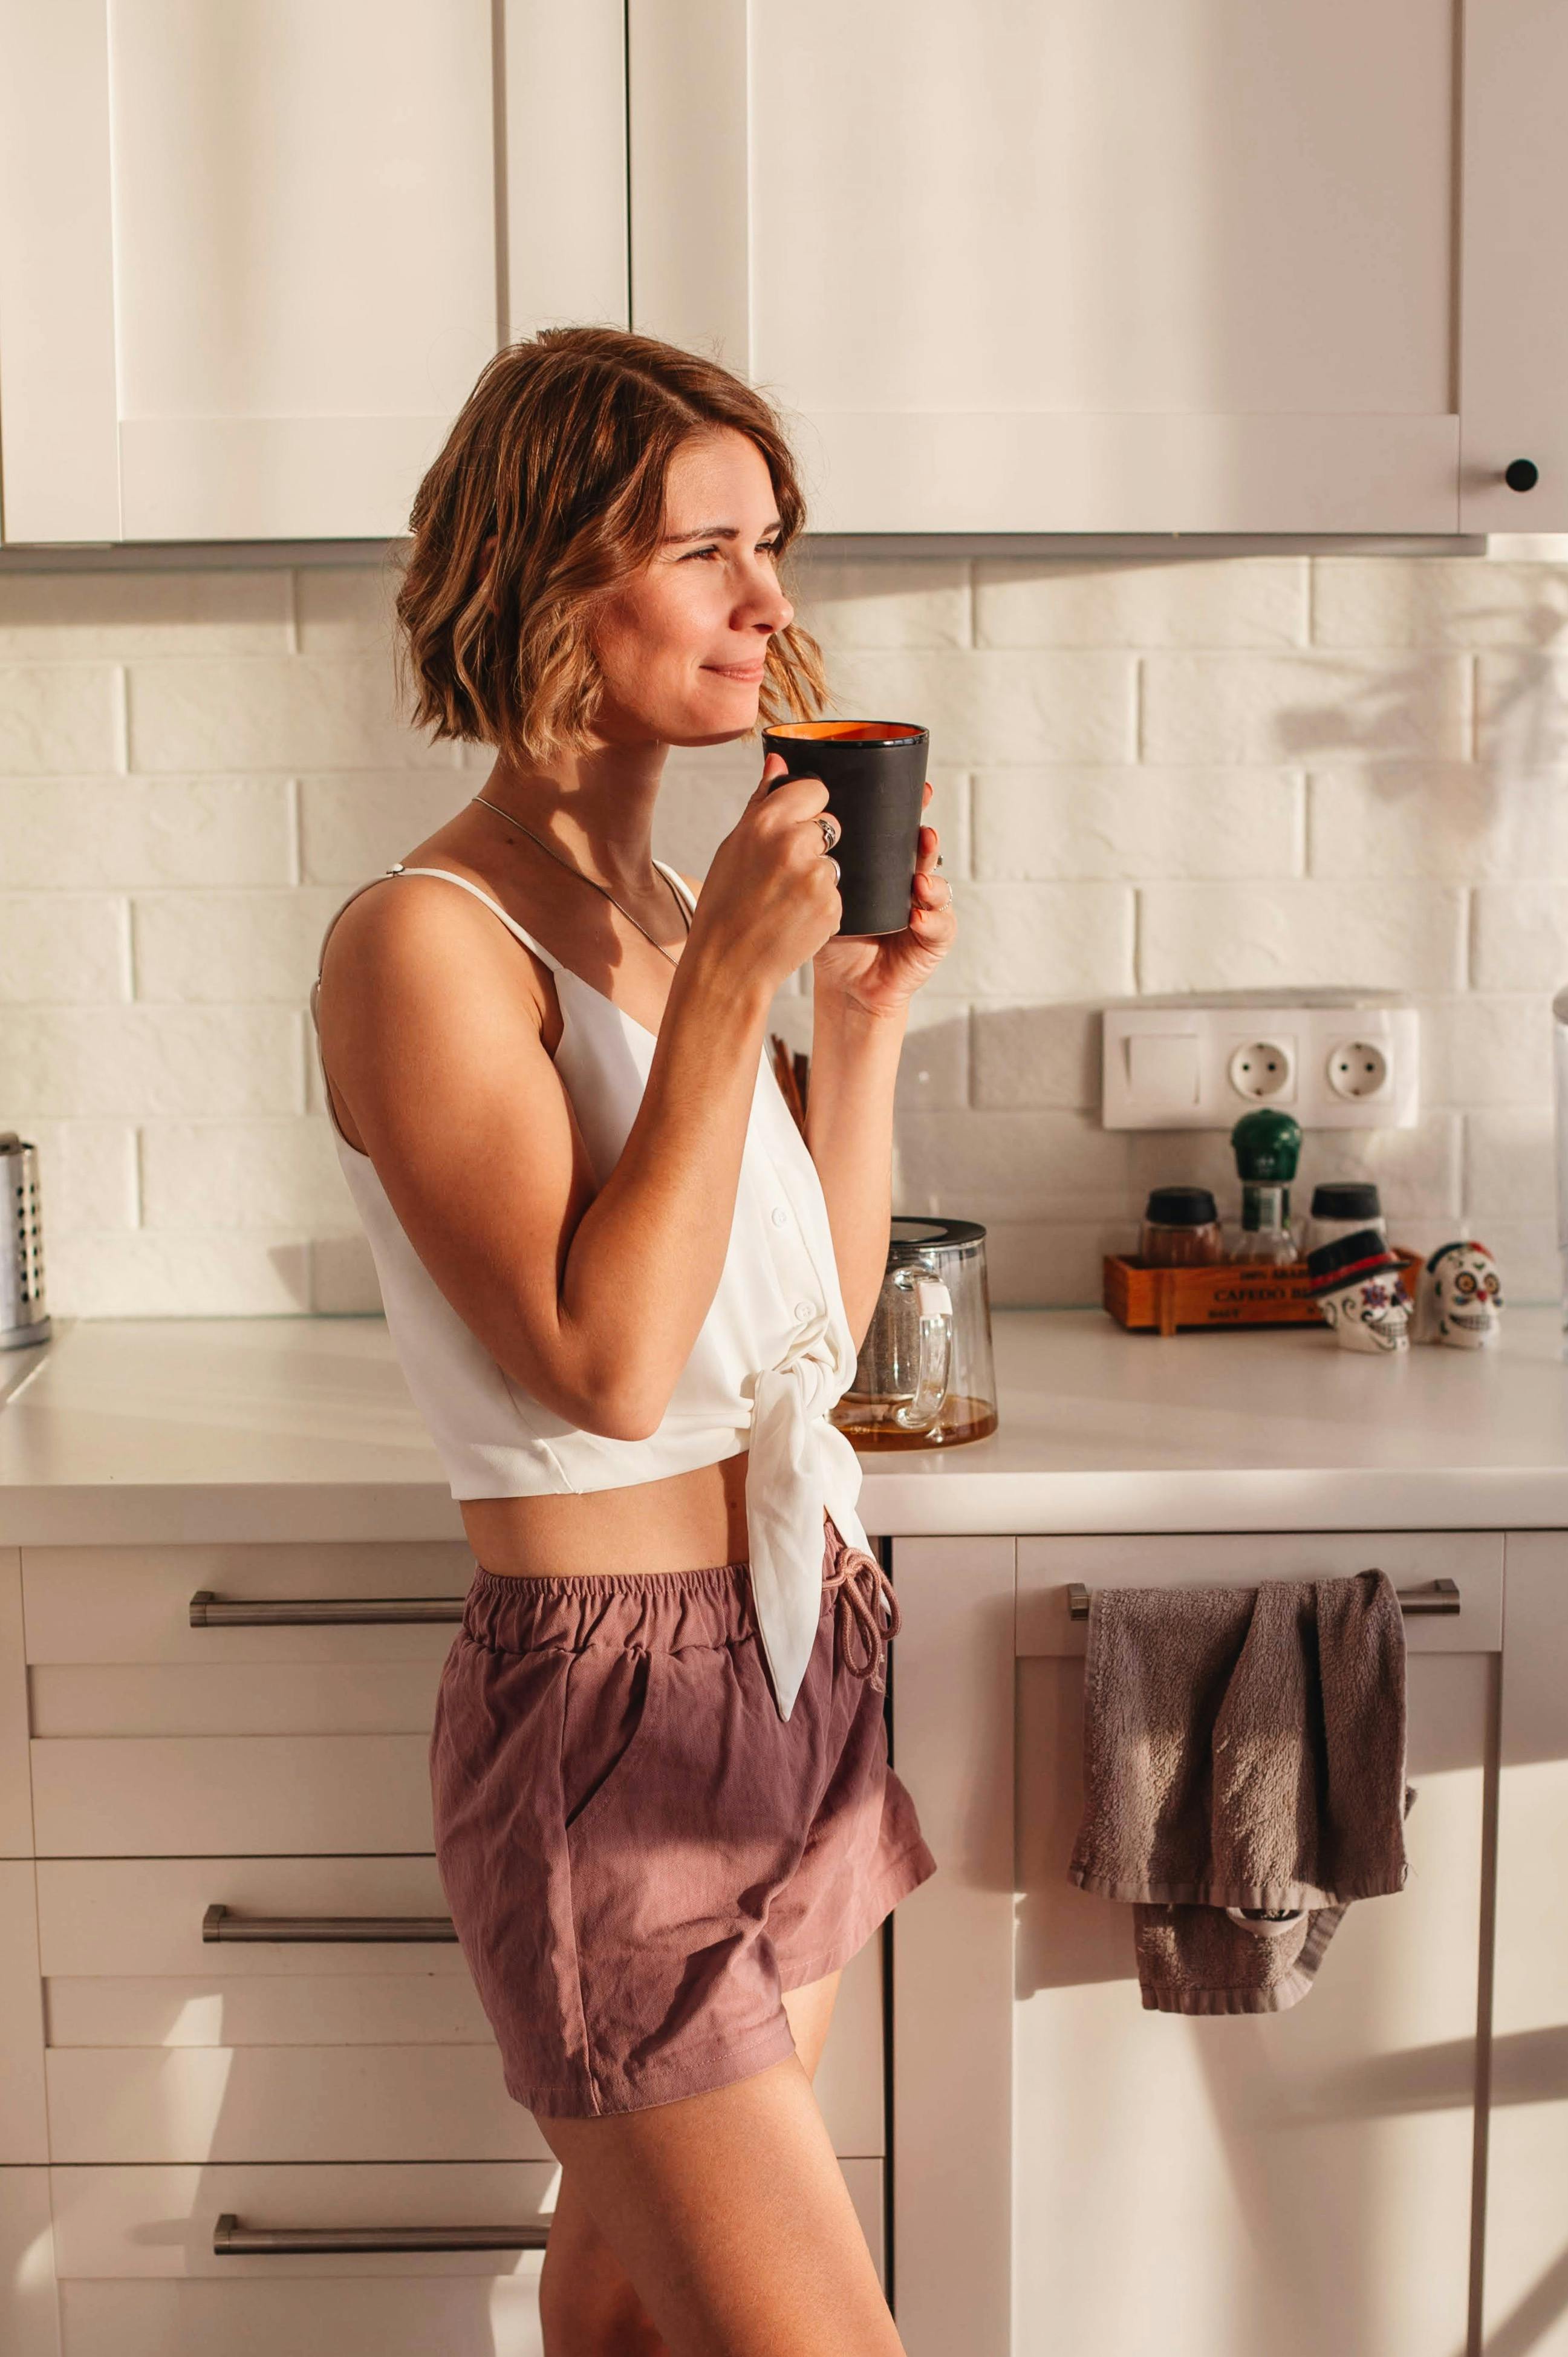 A woman enjoying her house with a cup of coffee | Source: Pexels